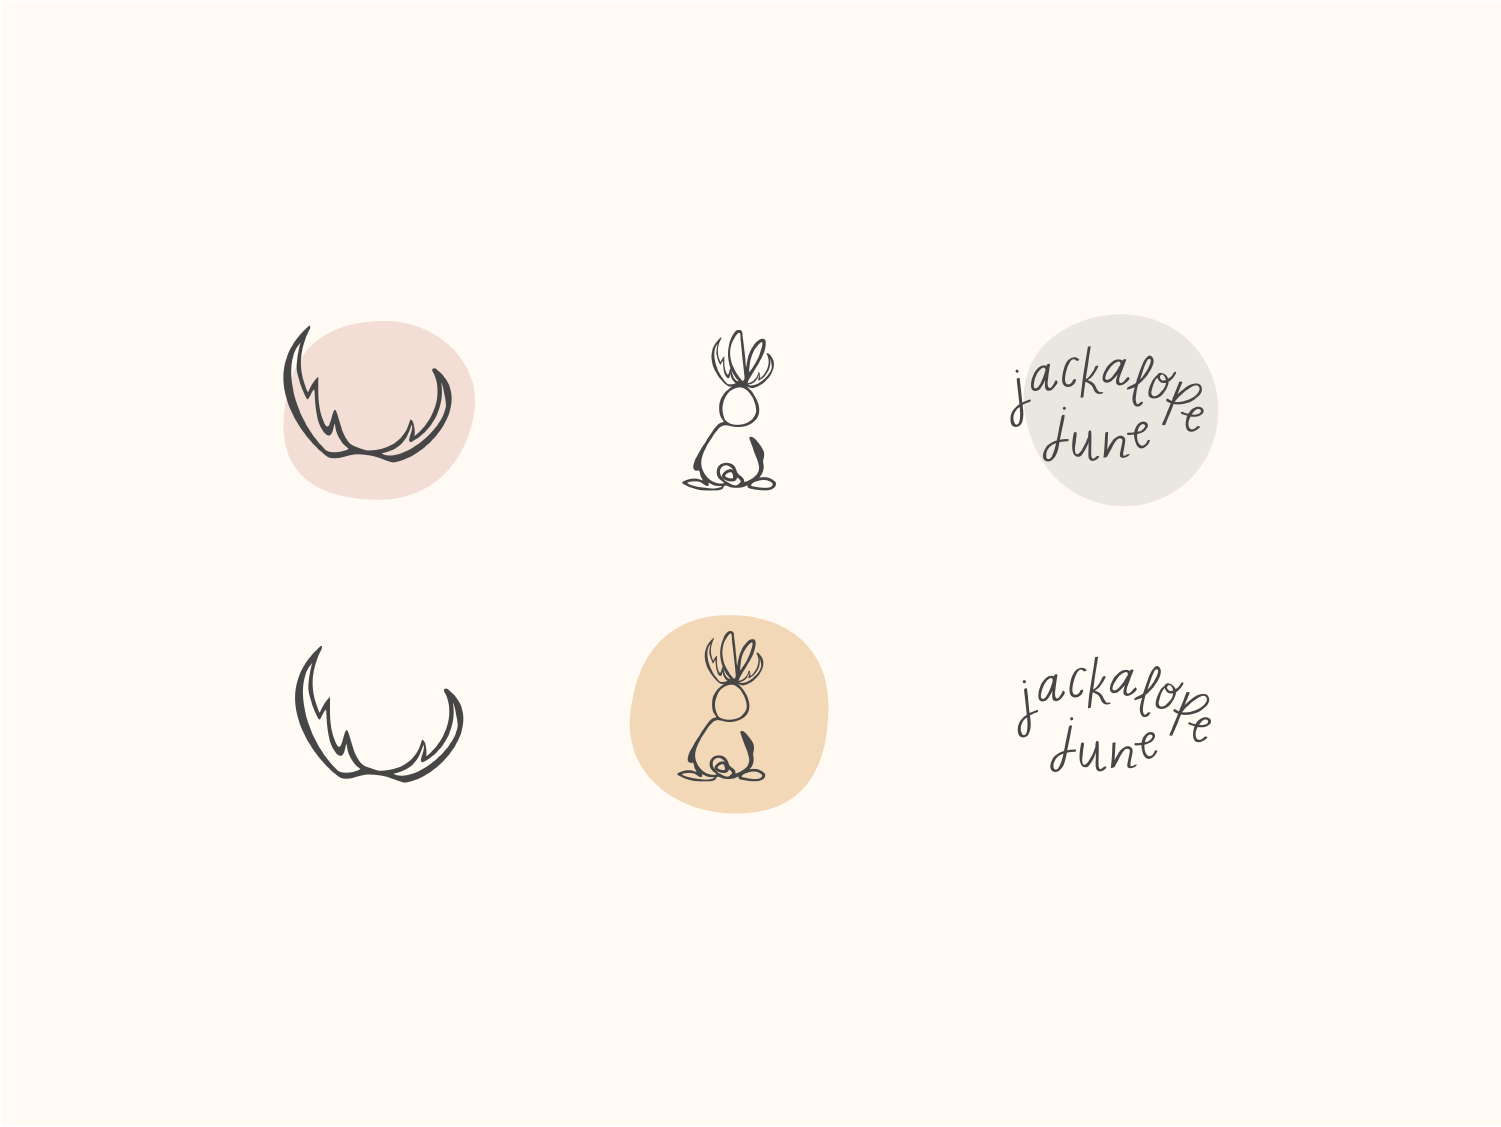 A collection of the jackalope june icons.